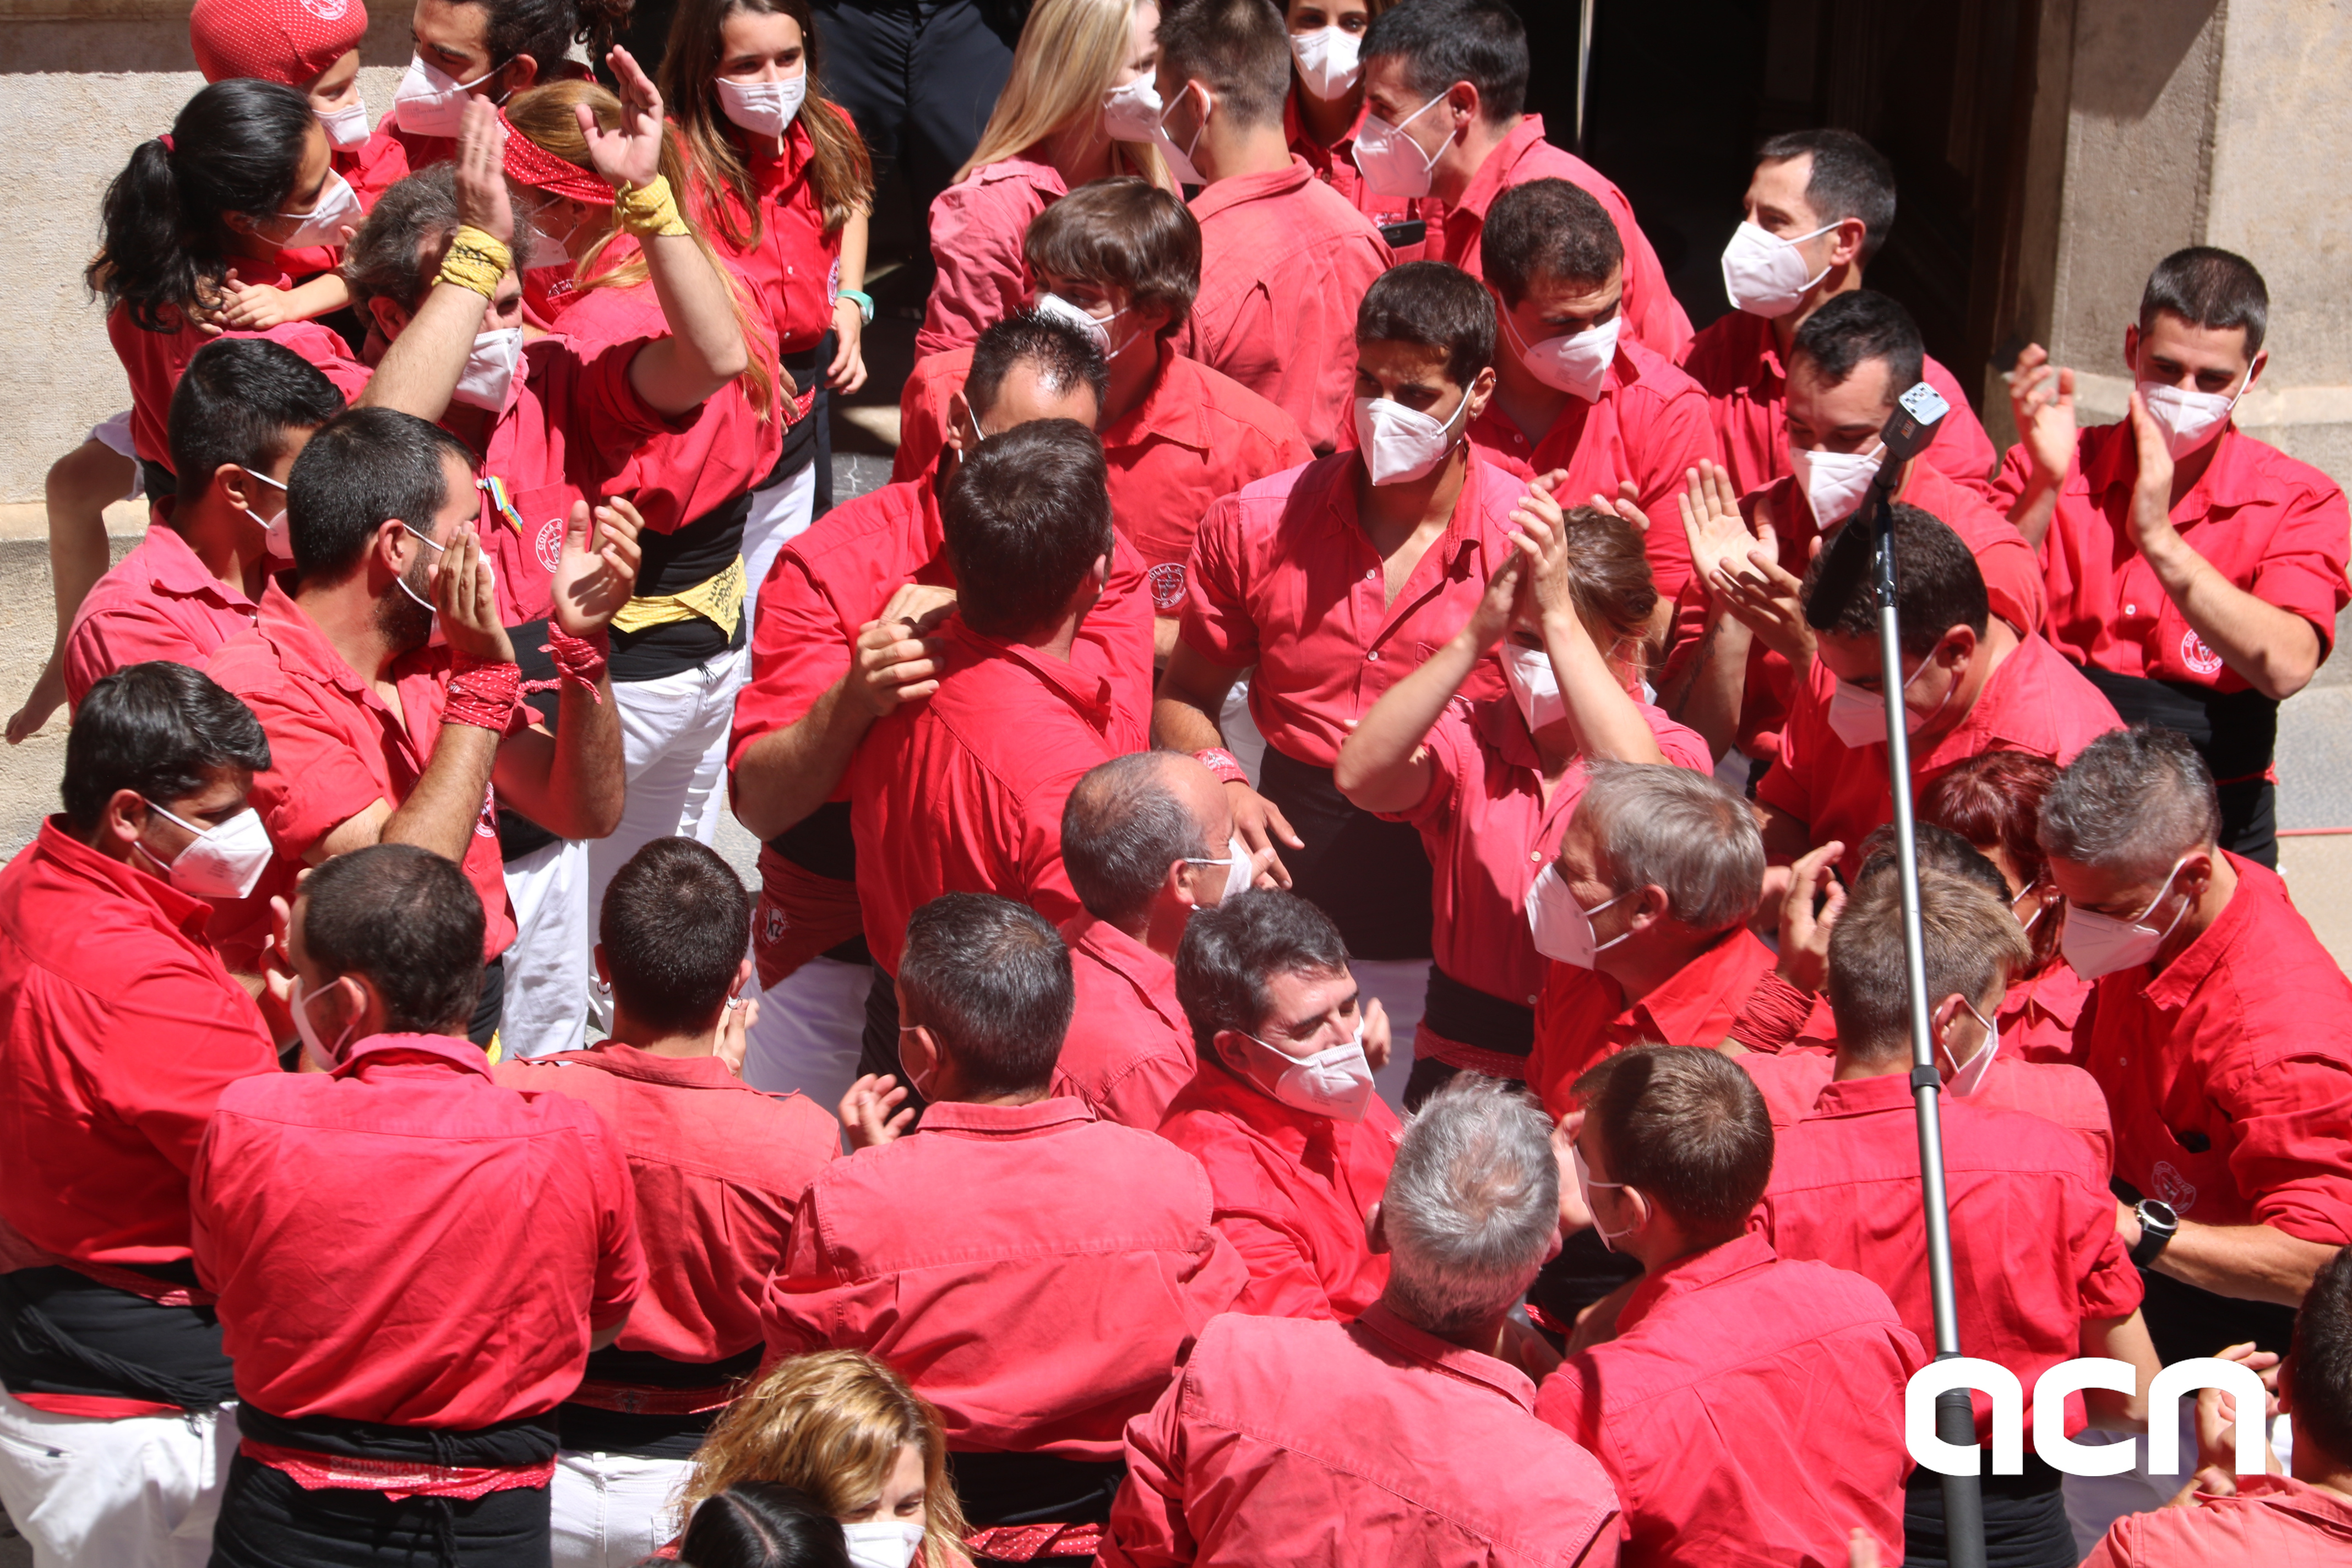 The team of Joves Chiquets de Valls after building a human tower (by Anna Ferràs)